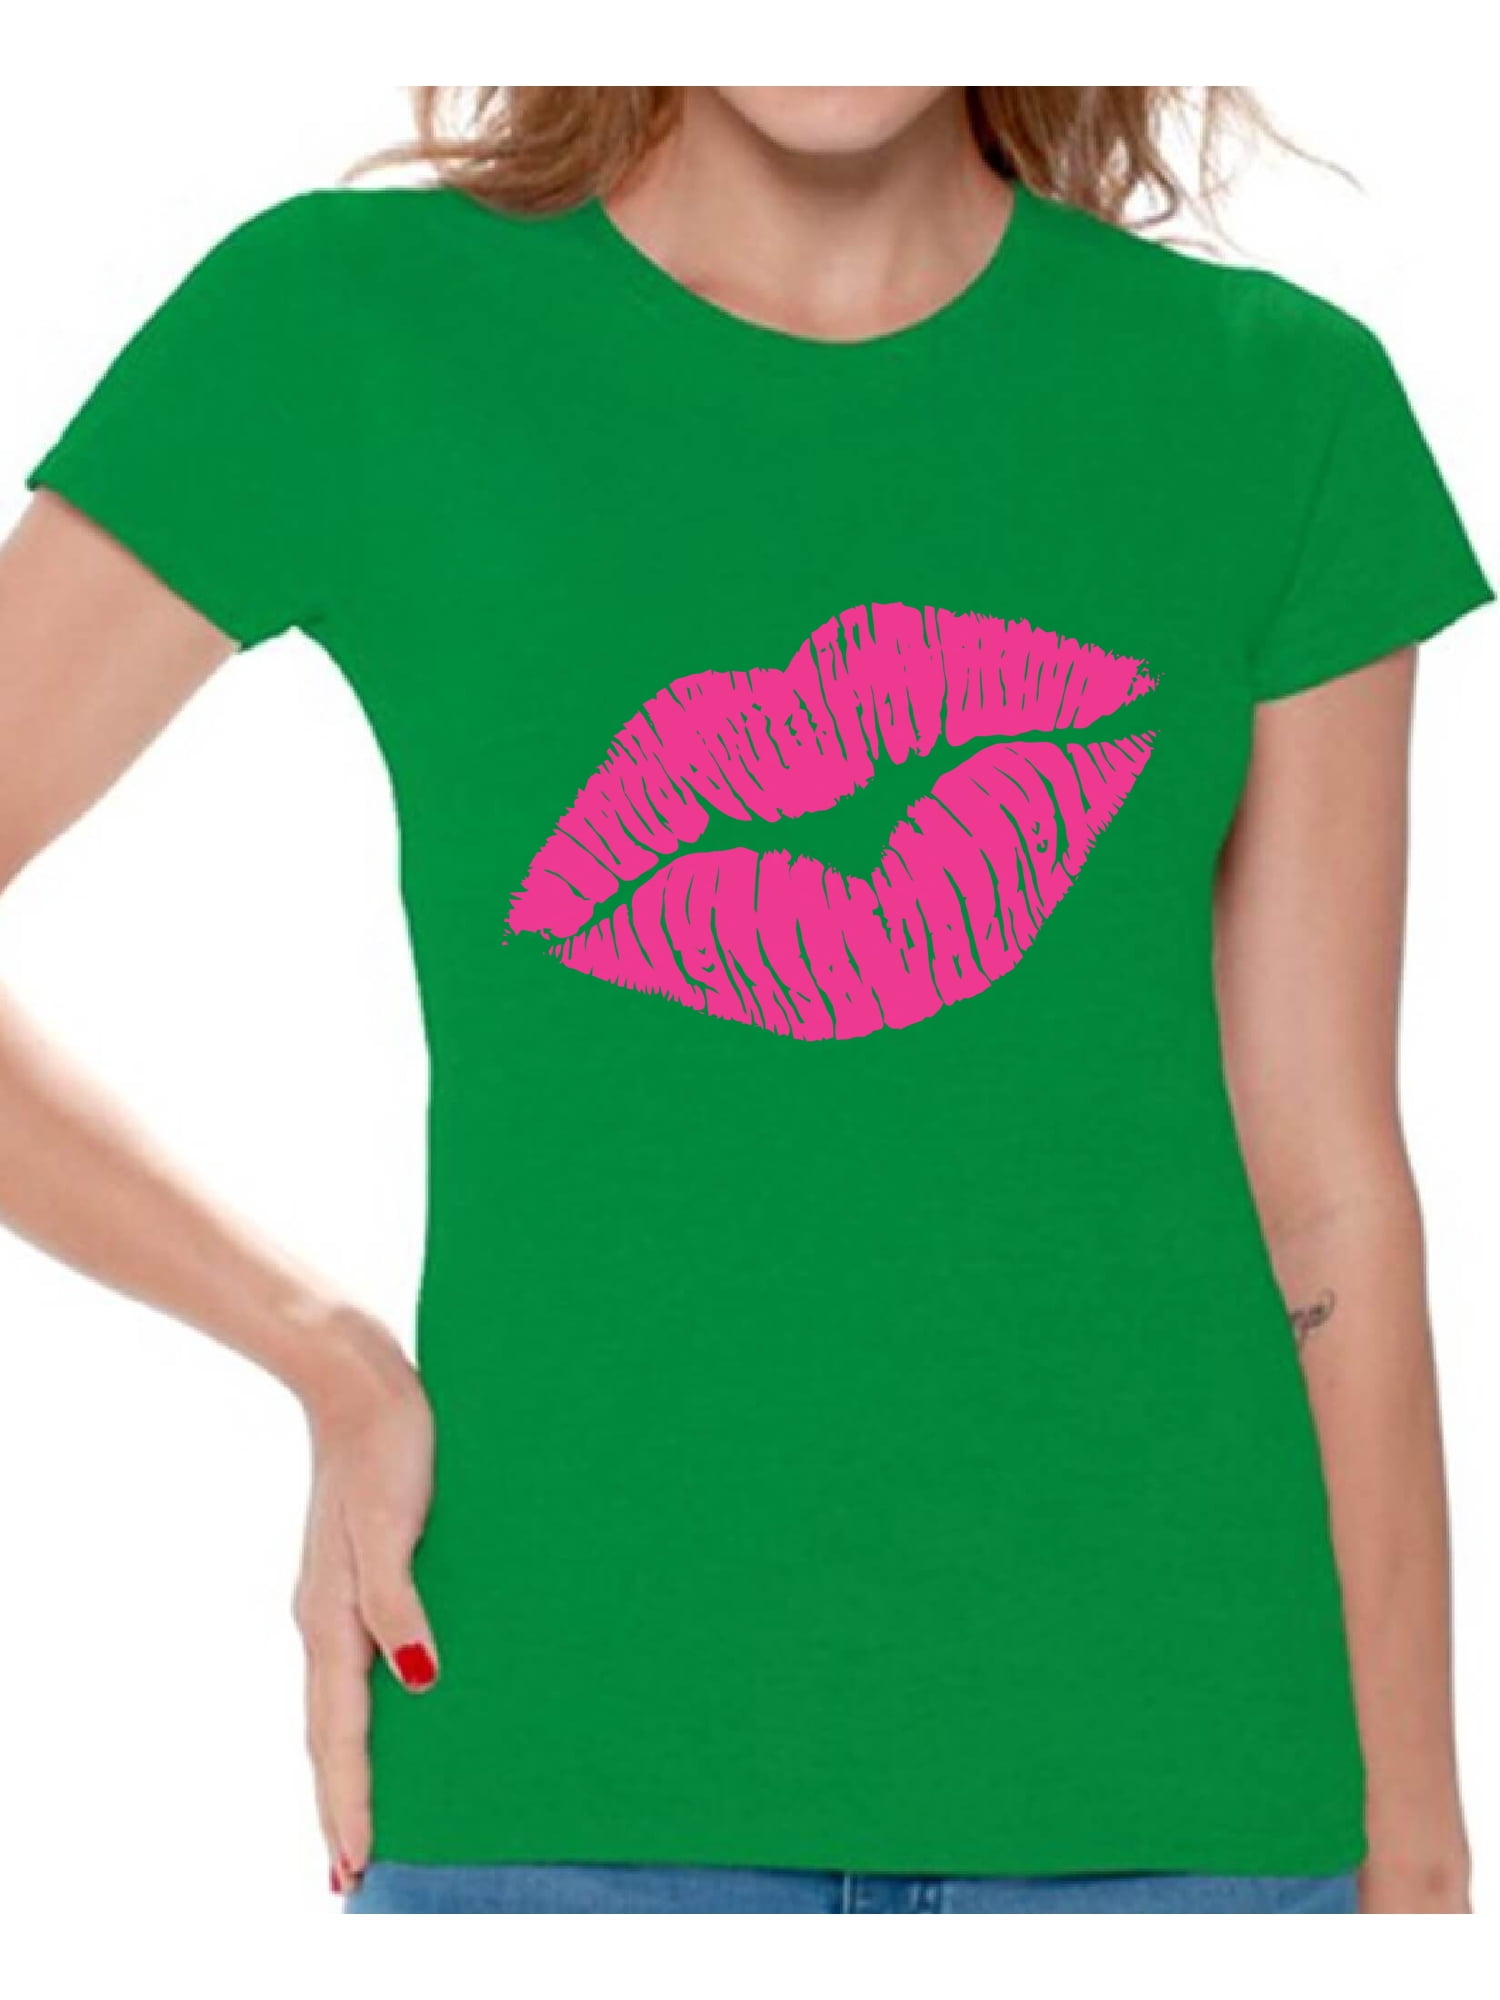 Awkward Styles Pink Lips Shirt Retro 80s Neon Lips T Shirt 80s Shirt 80s T  Shirt Retro Vintage 80s Costume 80s Clothes for Women 80s Outfit 80s Party  Girl Shirt 80s Accessories 